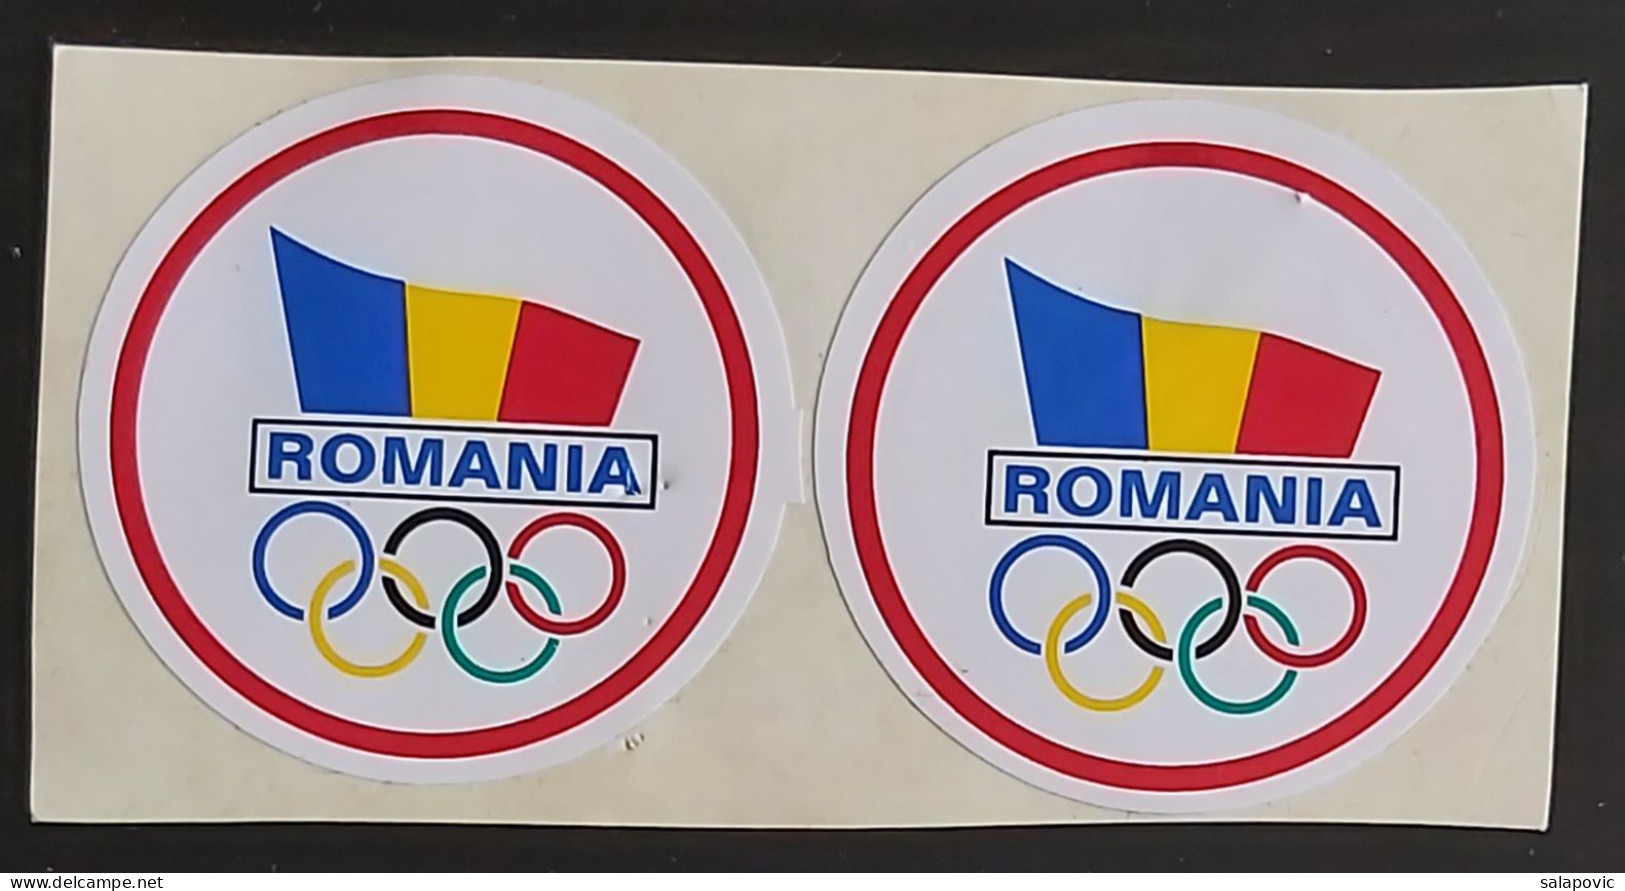 National Olympic Committee NOC ROMANIA, 2 Pieces Sticker  Label - Habillement, Souvenirs & Autres